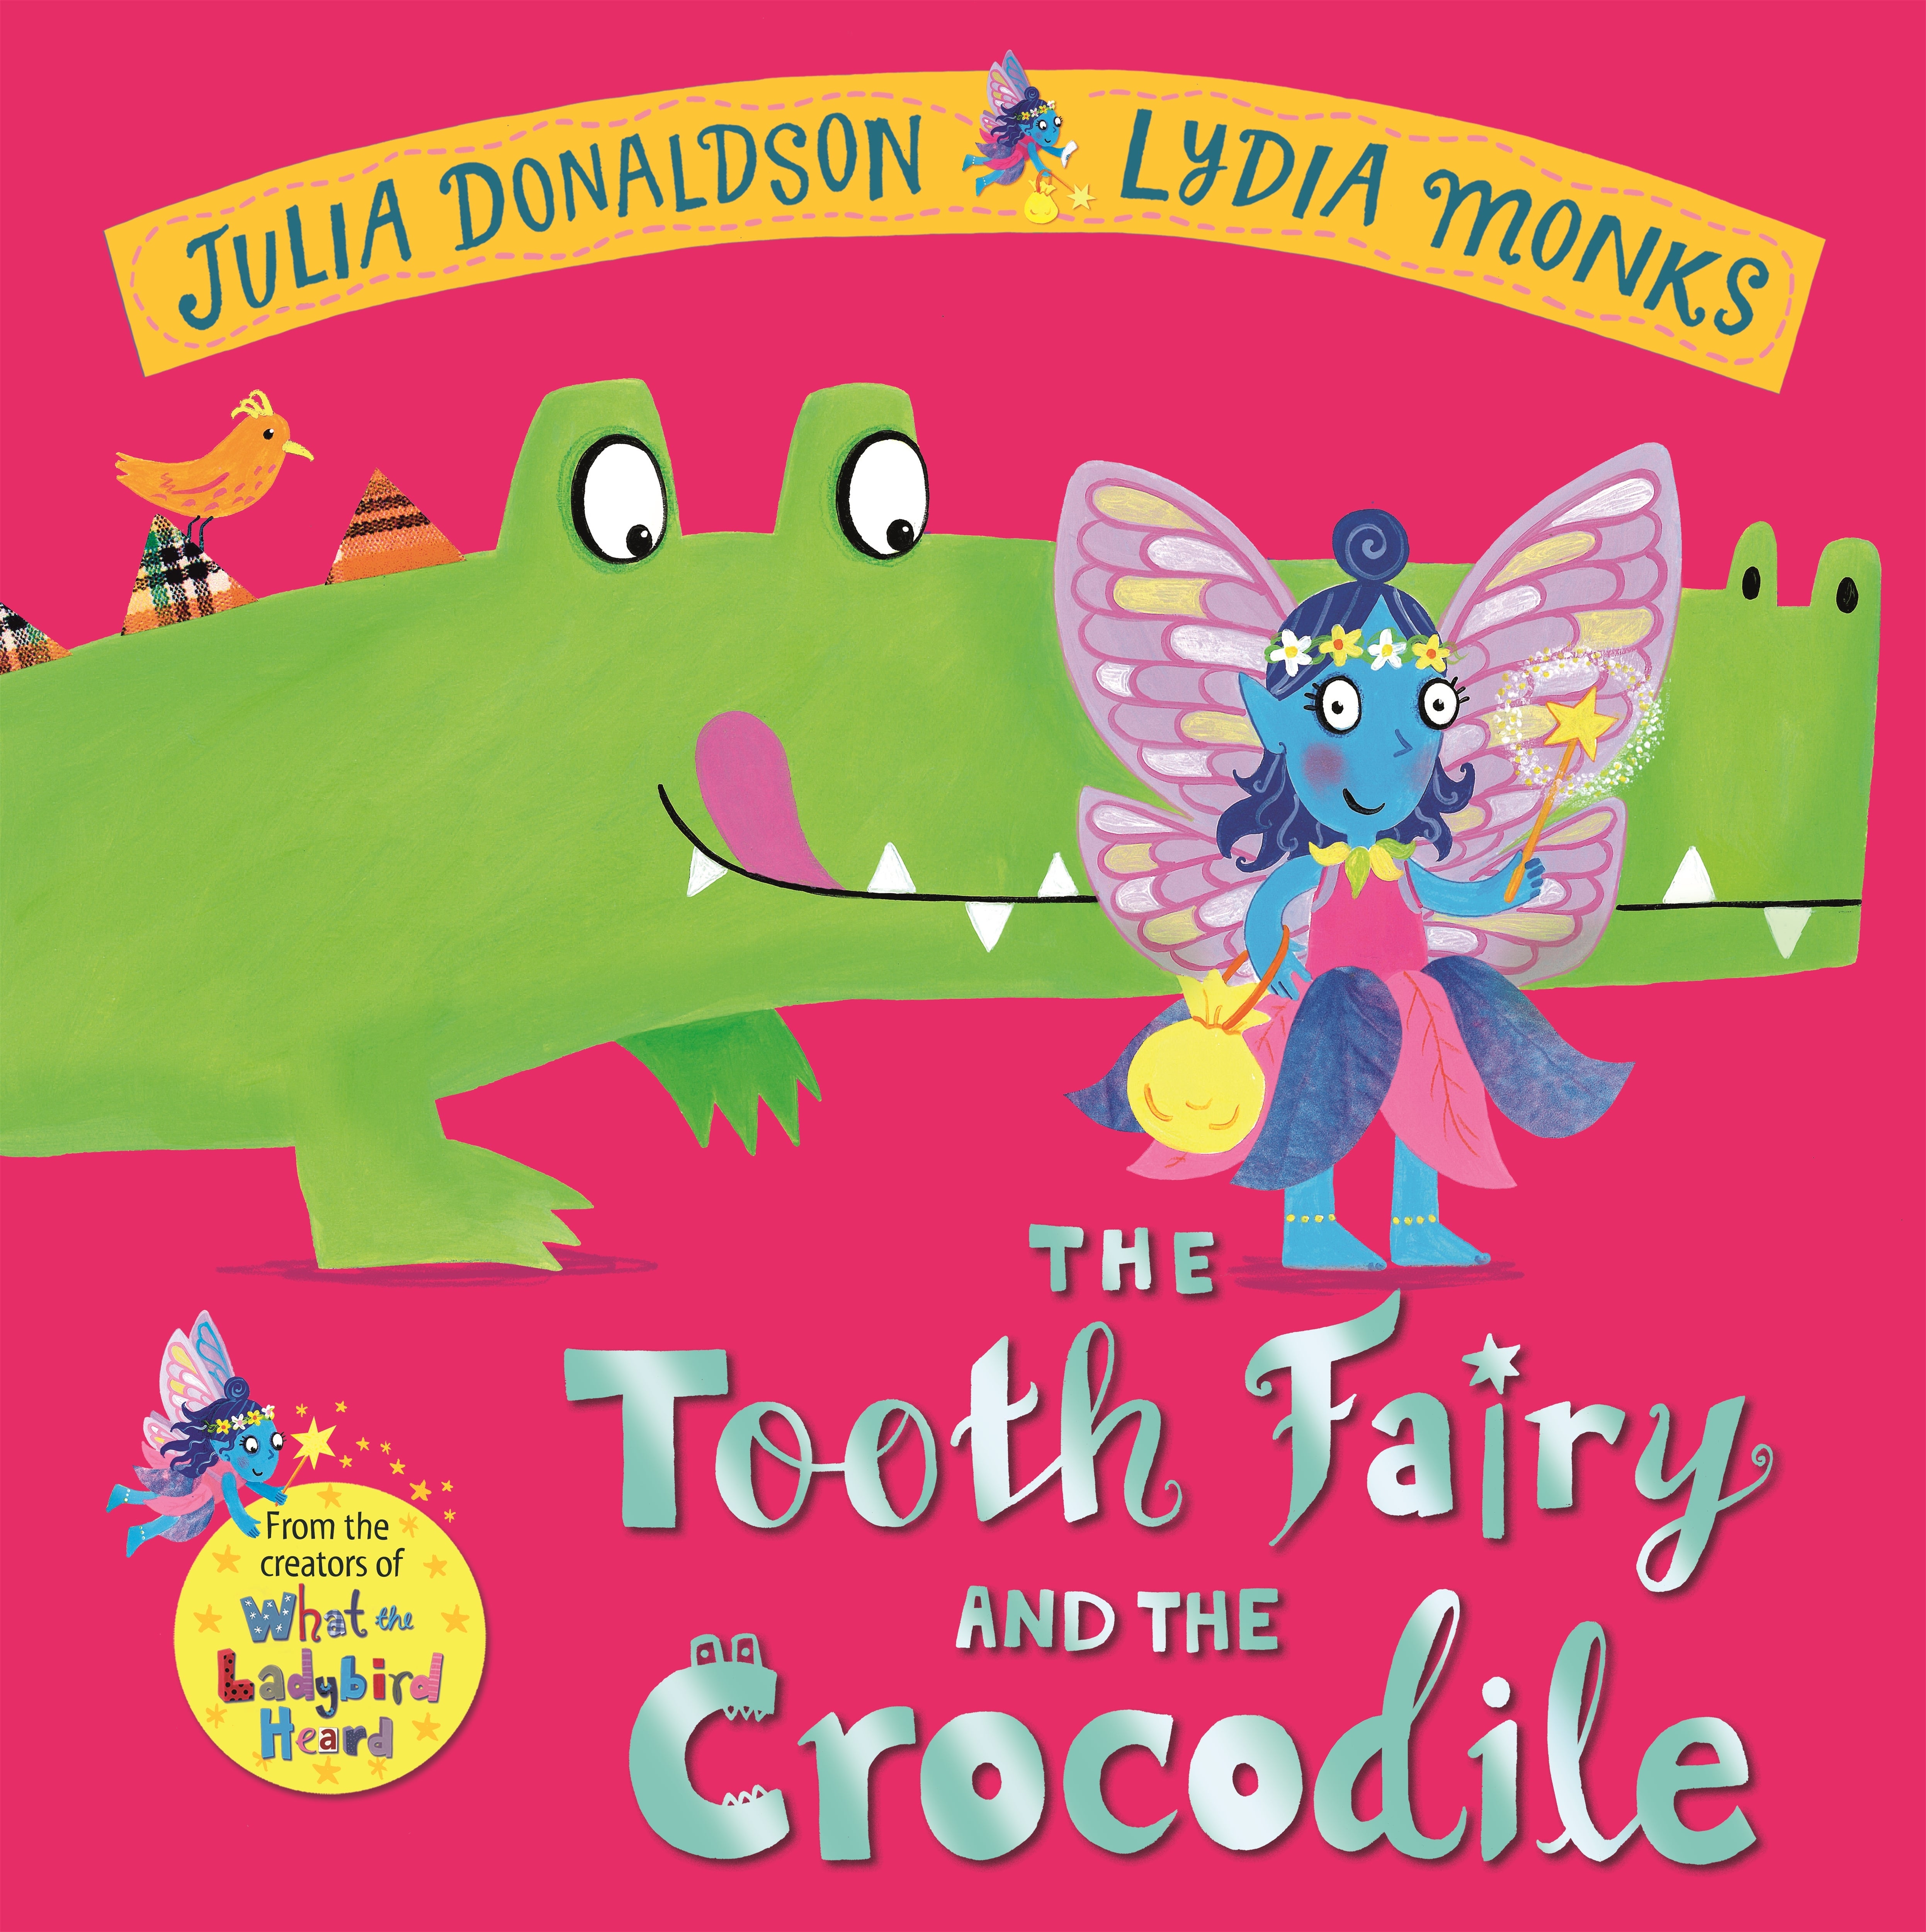 Book Signing with Julia Donaldson - Steyning Bookshop